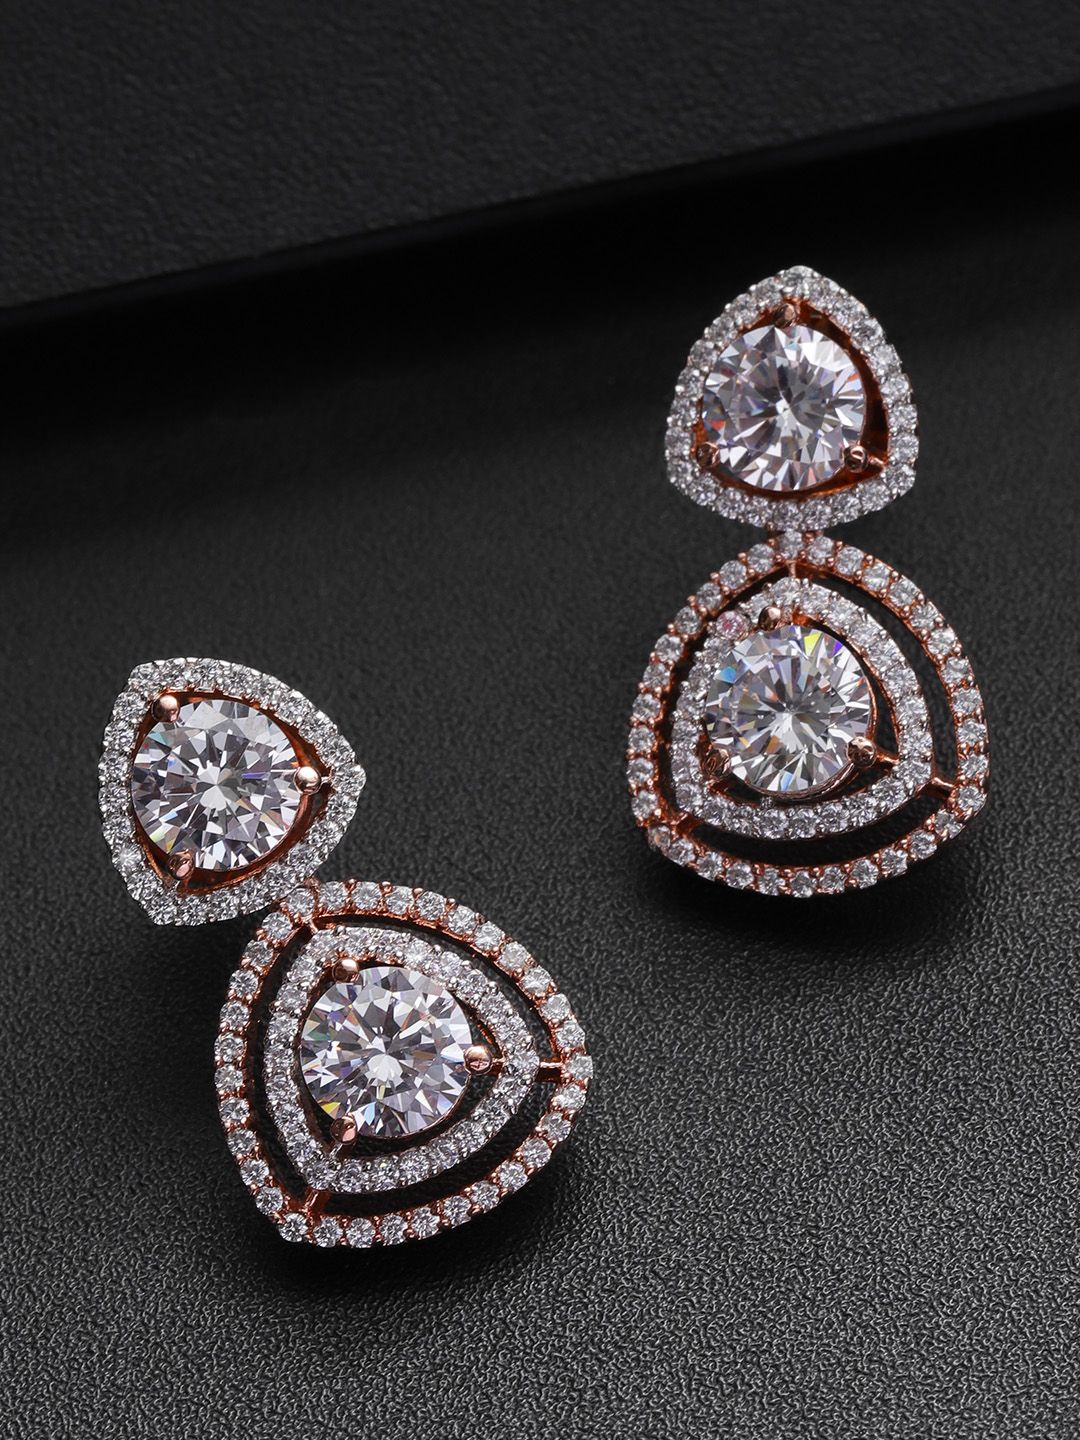 Priyaasi Rose Gold-Plated Stone-Studded Handcrafted Contemporary Drop Earrings Price in India